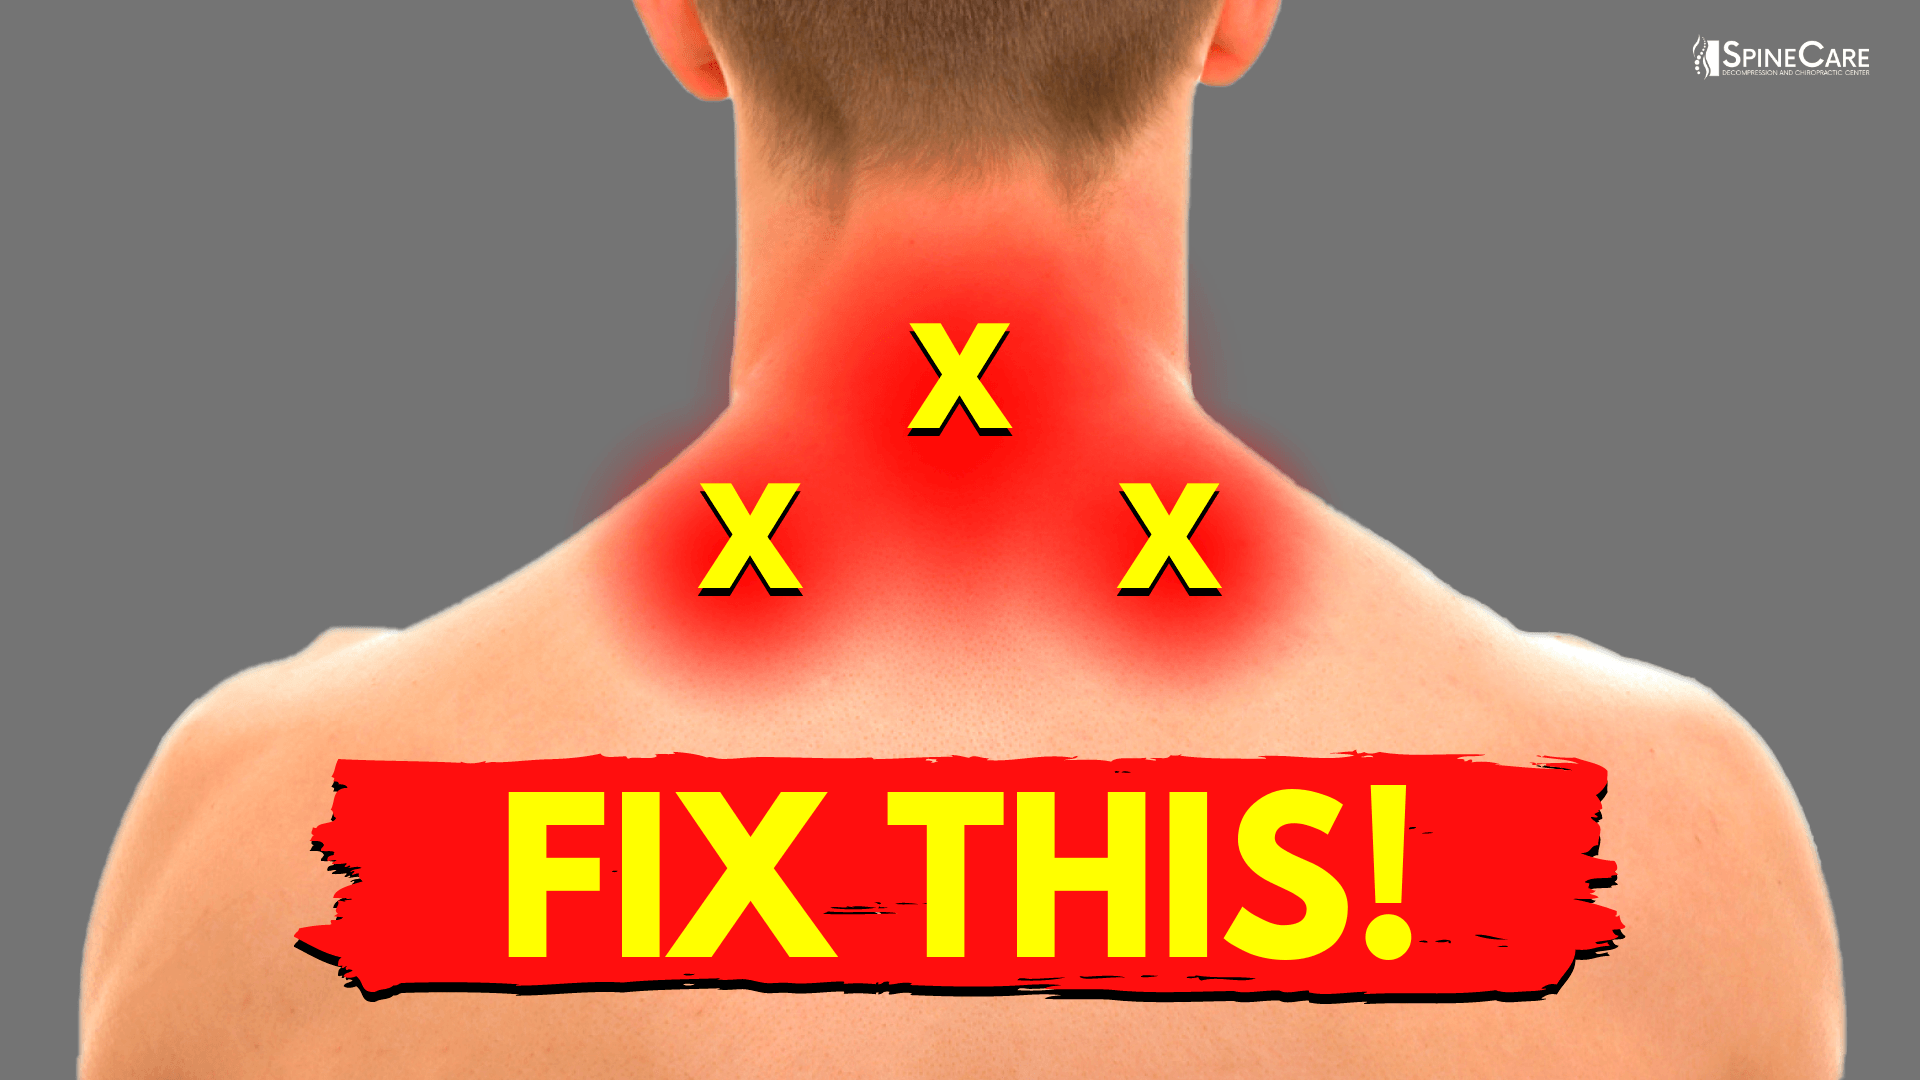 How to Quickly Relieve Pain at the BASE OF THE NECK | SpineCare | St. Joseph, Michigan Chiropractor